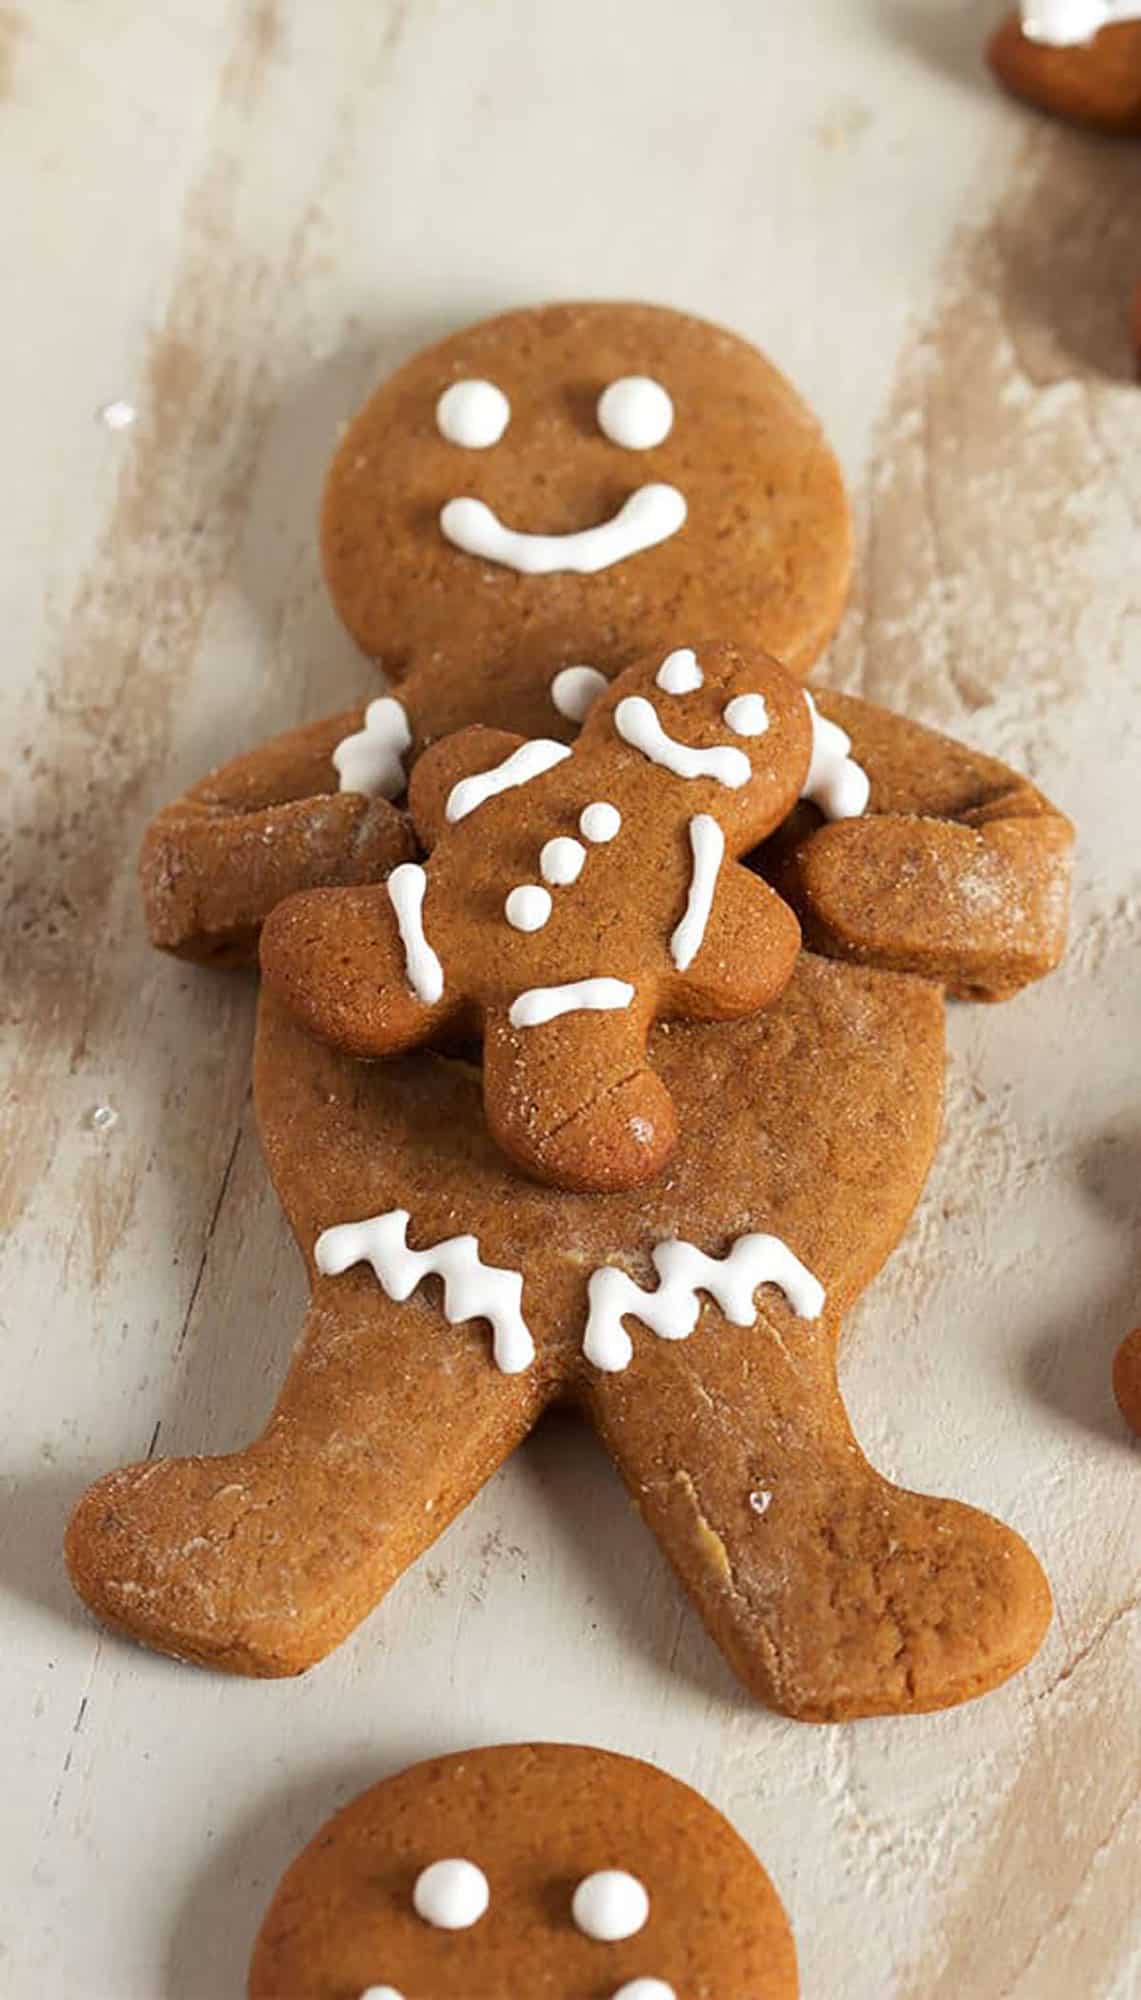 Gingerbread man cookie holding a small gingerbread cookie.